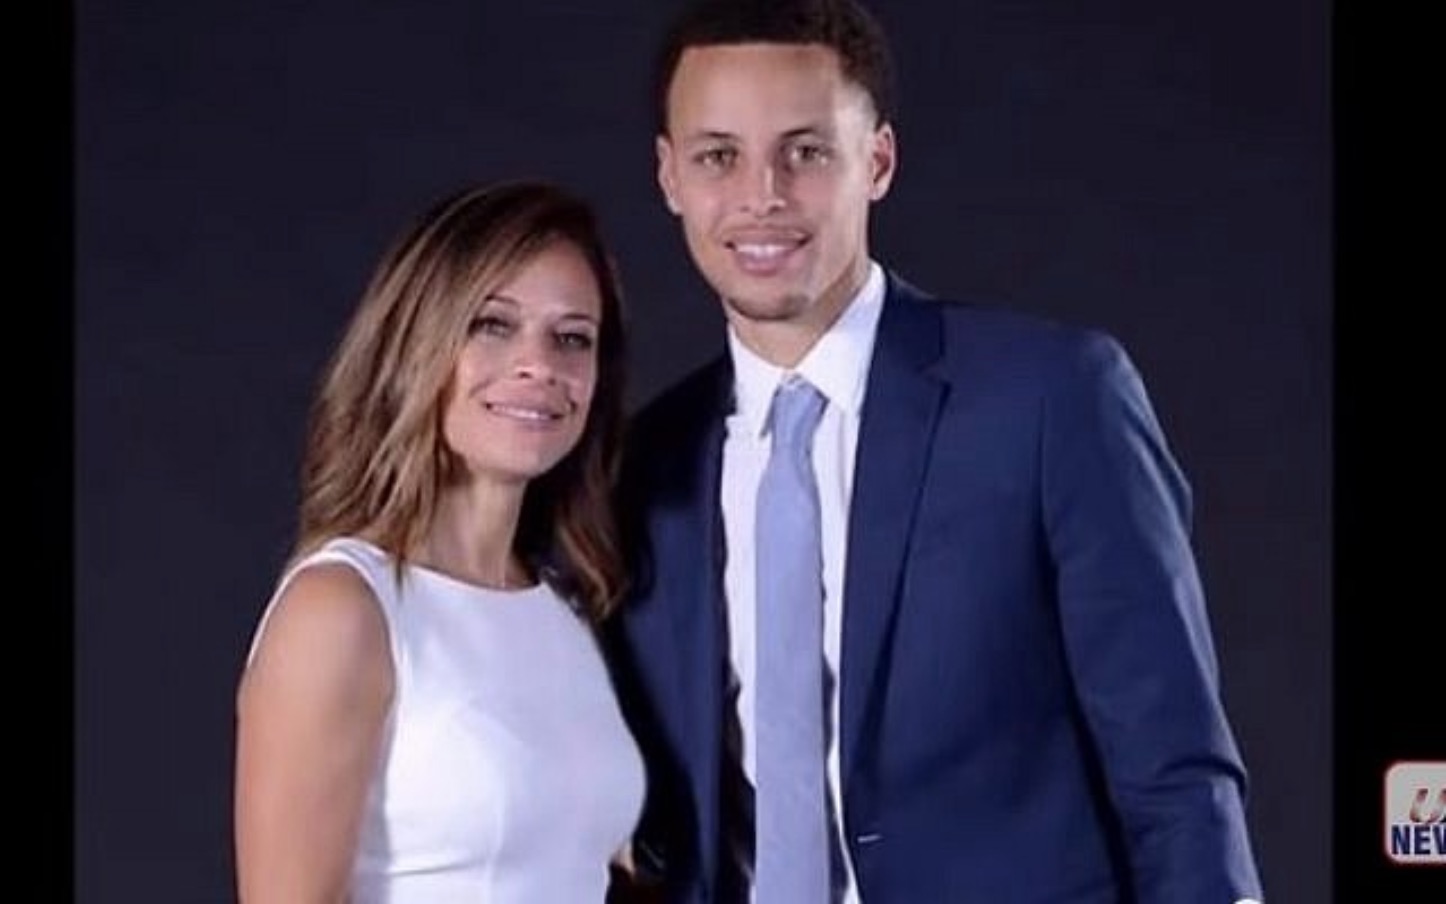 Sonya Curry, 5 Things You Didn't Know About Stephen Curry’s Mother